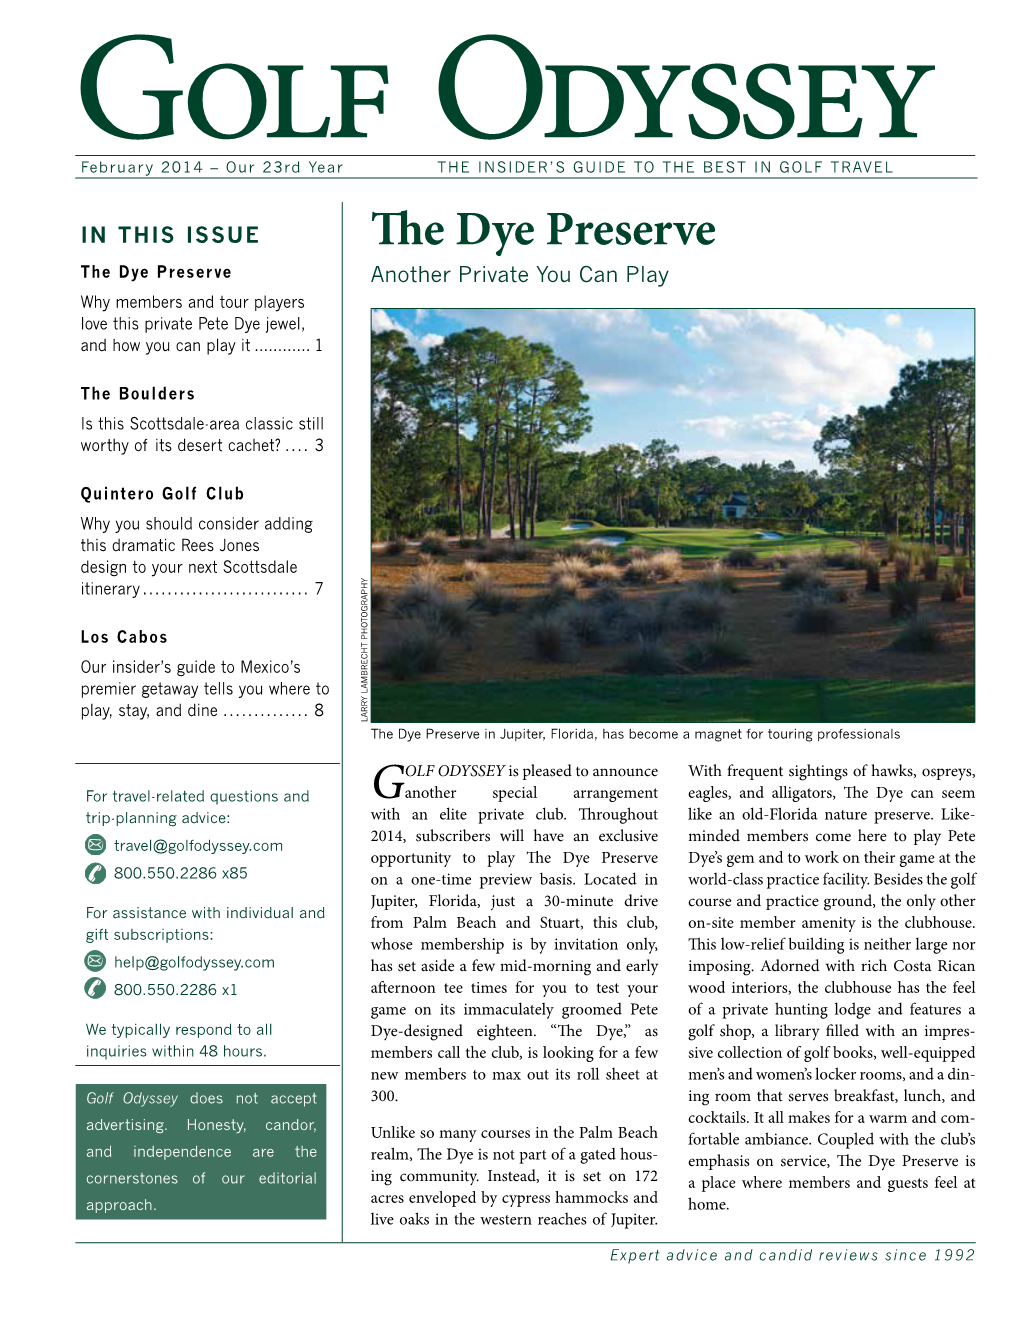 The Dye Preserve the Dye Preserve Another Private You Can Play Why Members and Tour Players Love This Private Pete Dye Jewel, and How You Can Play It